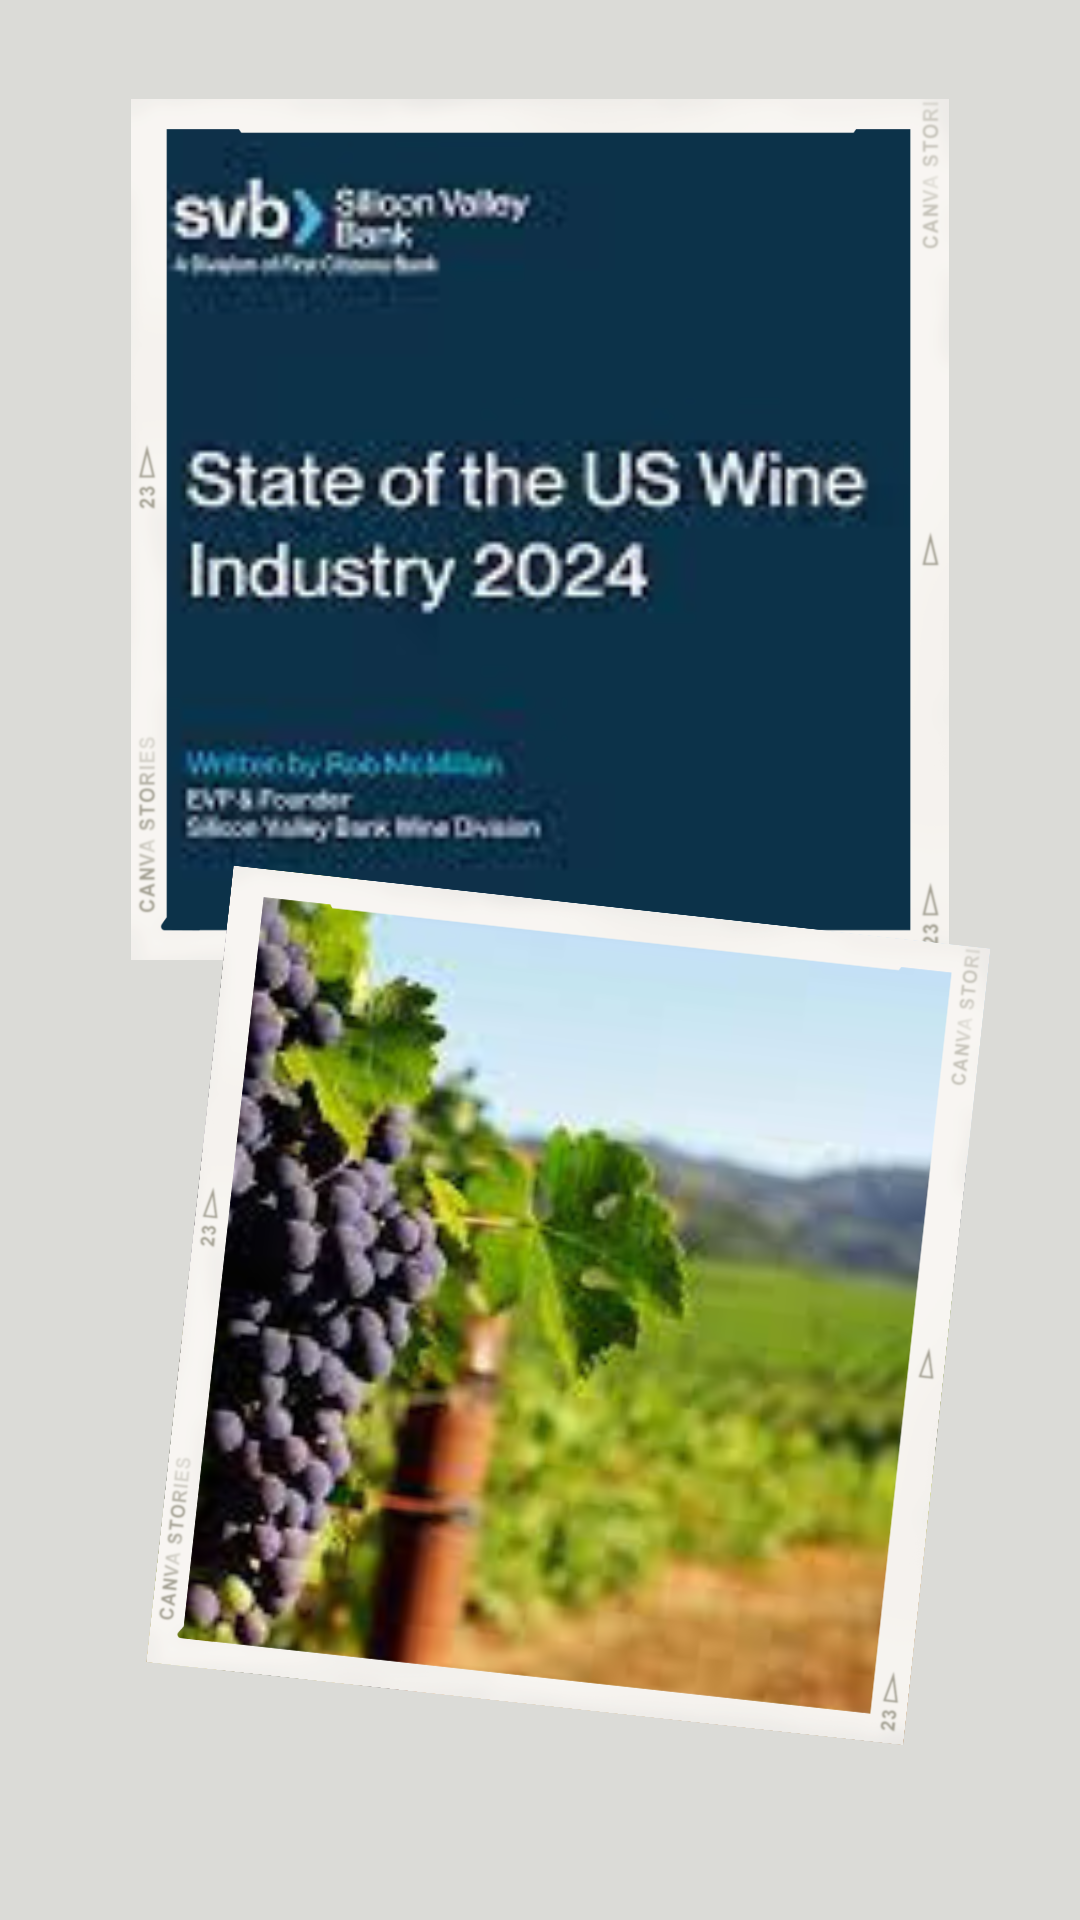 Silicon Valley Bank Releases 23rd Annual State of the US Wine Industry Report